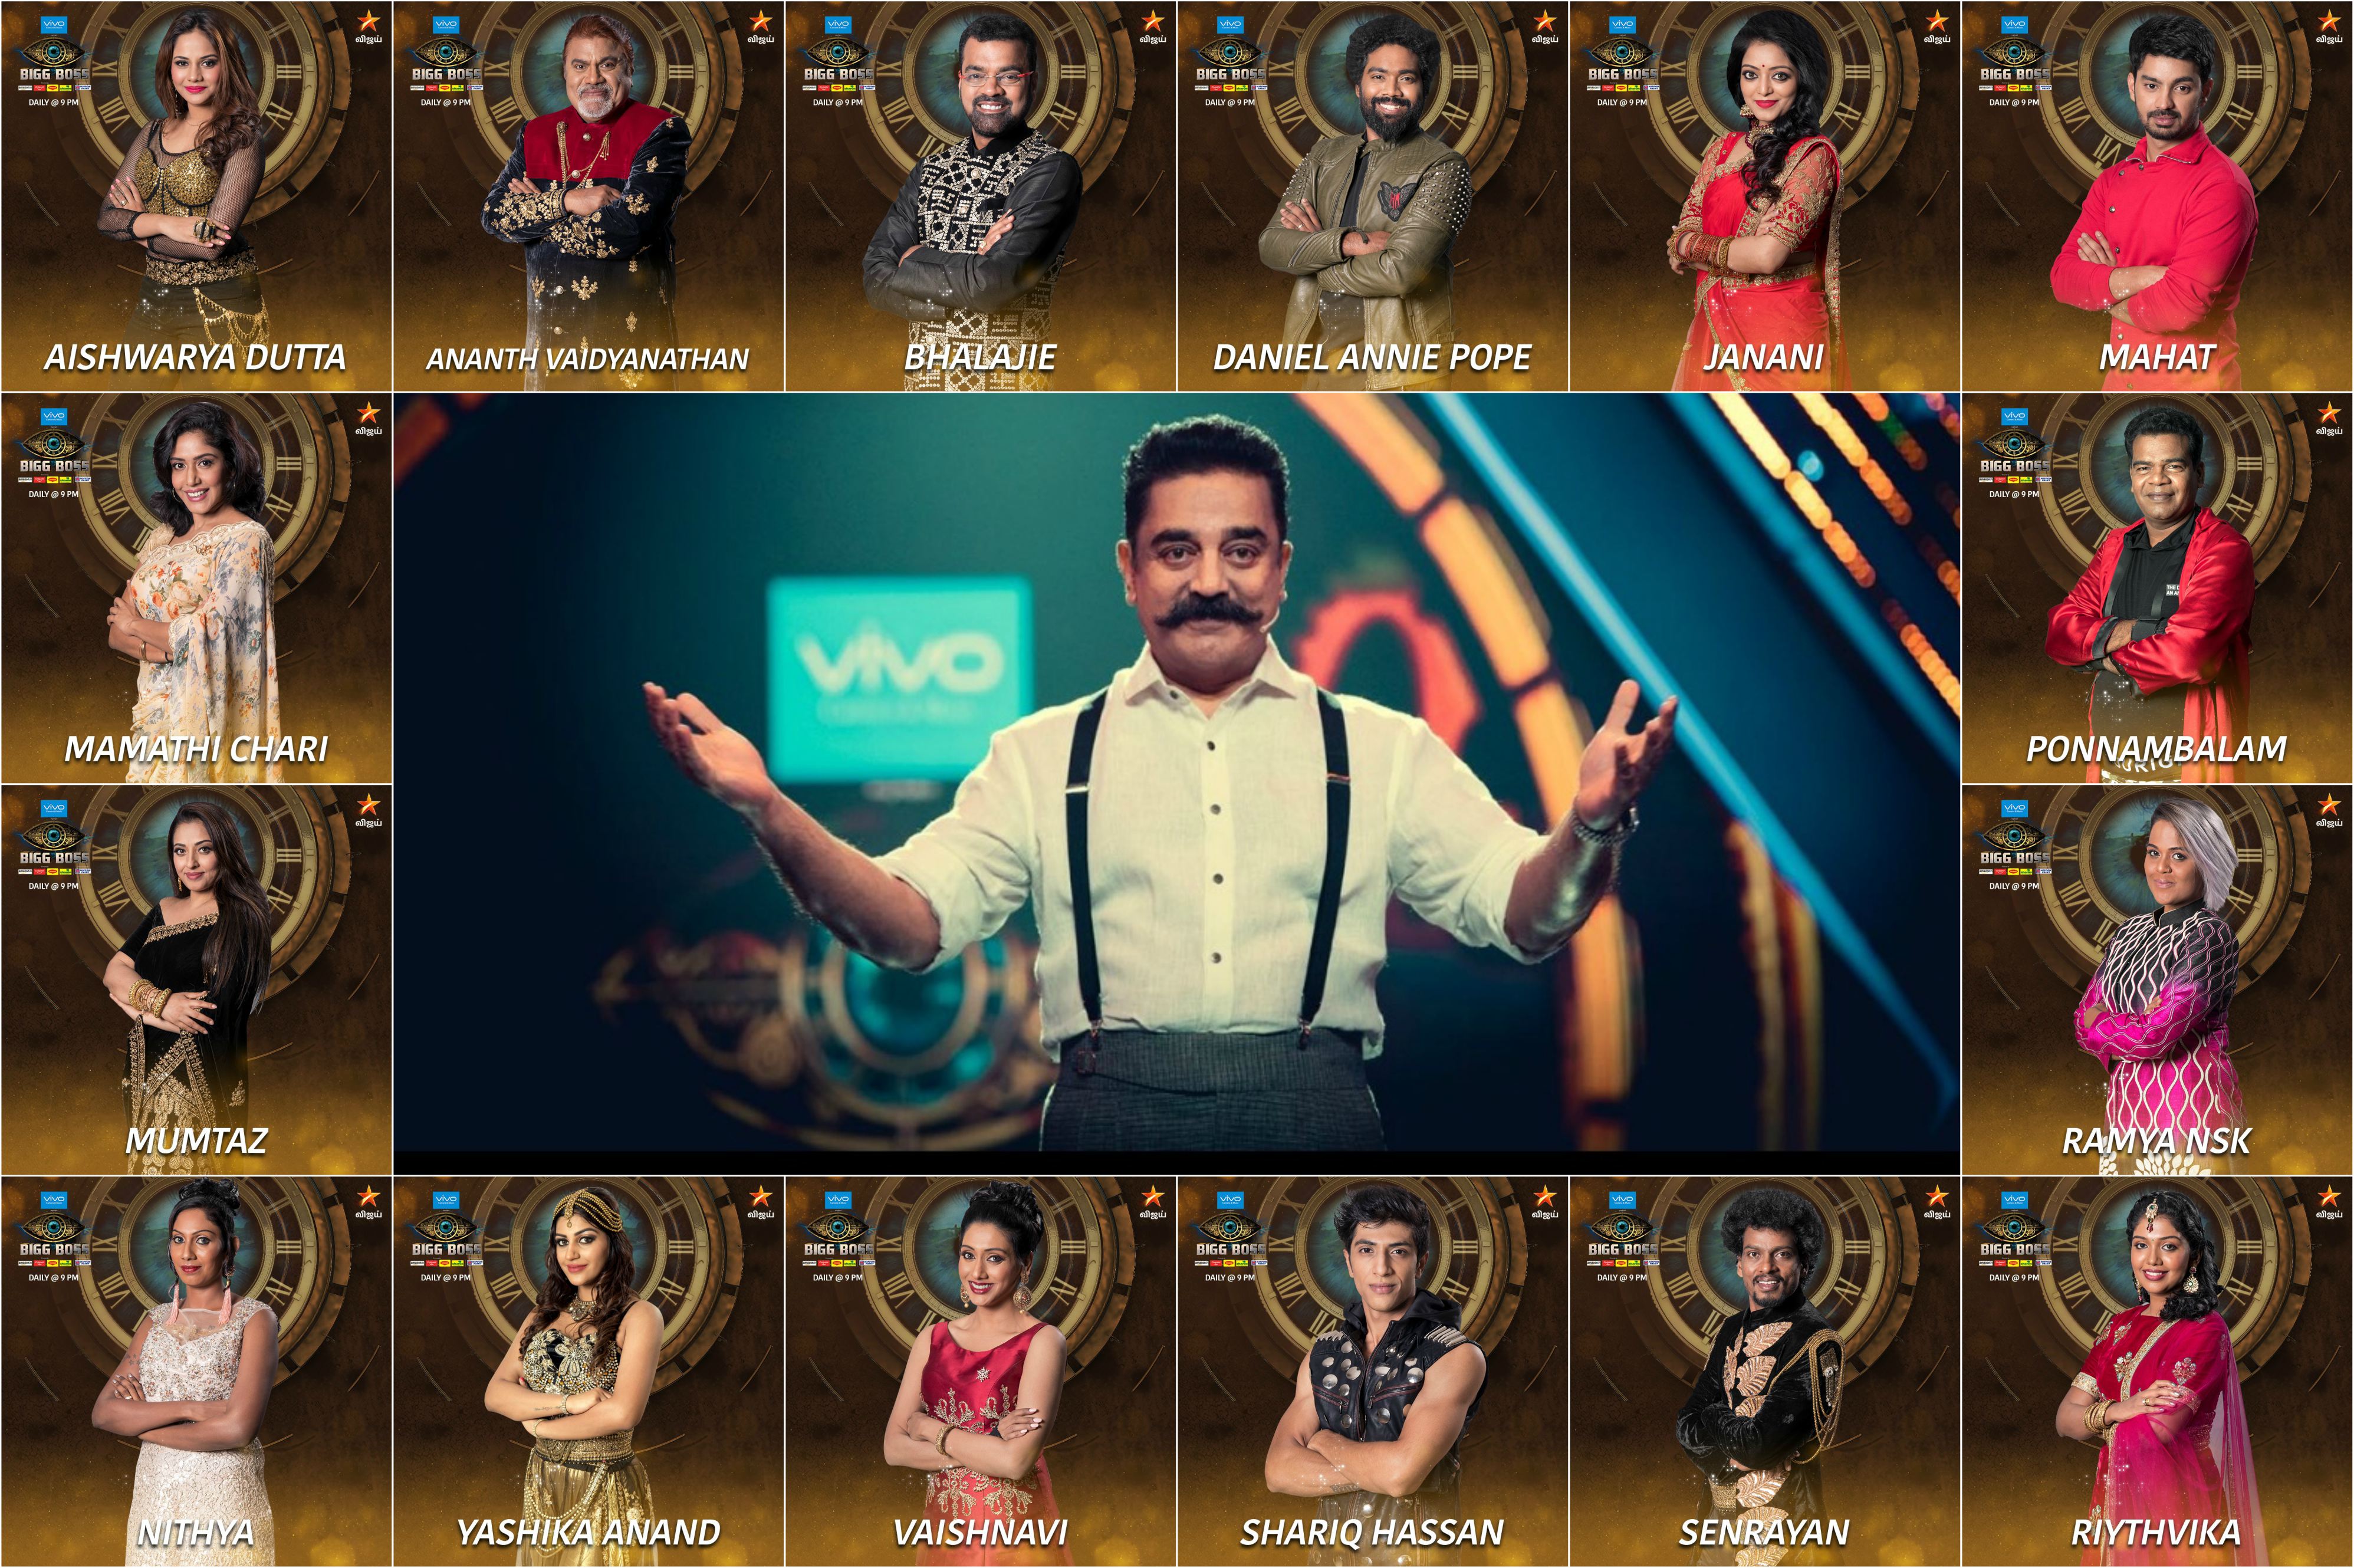 Bigg Boss Tamil 6: Here's Everything You Need To Know About